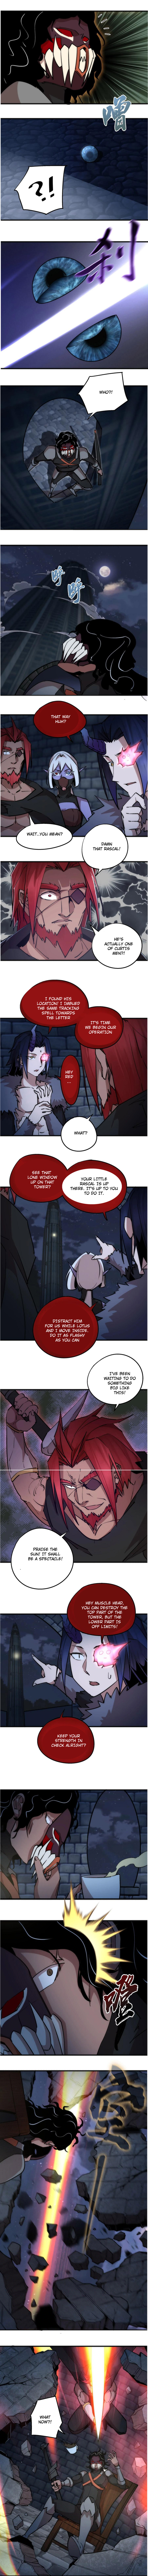 I'm Not The Overlord! - Page 2